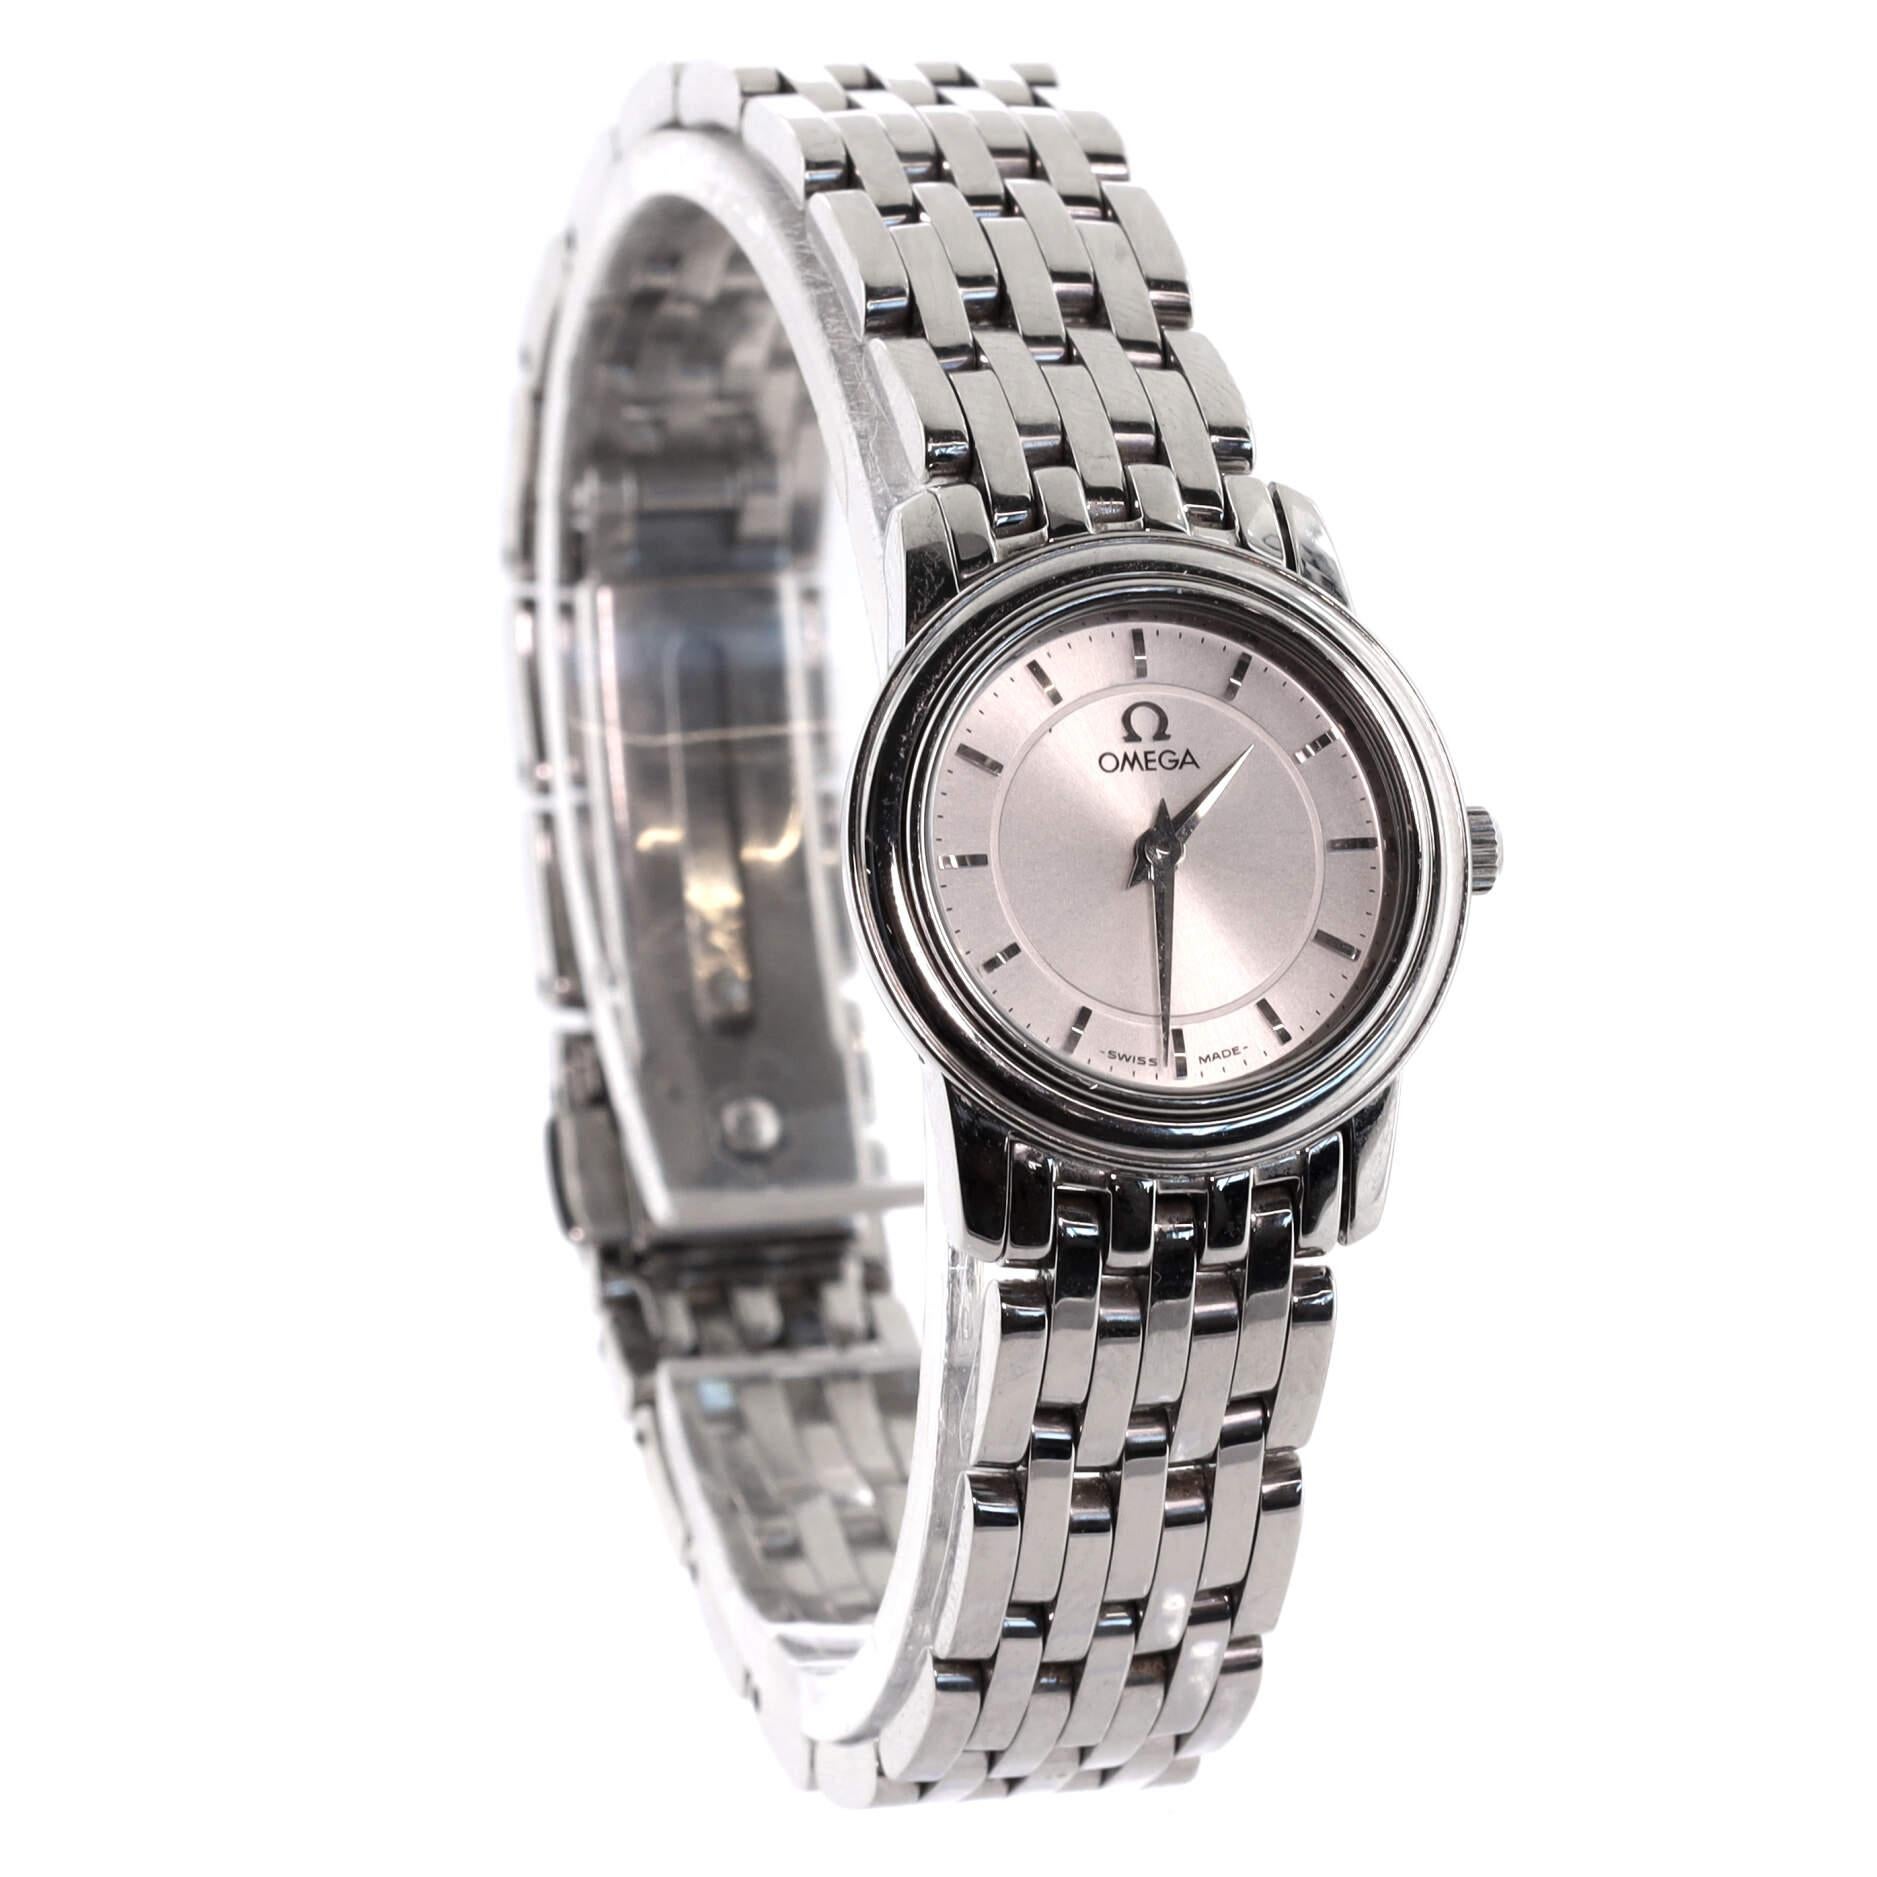 Condition: Great. Minor scratches and wear throughout. Wear and scratches on case and bracelet.
Accessories: No Accessories
Measurements: Case Size/Width: 22mm, Watch Height: 6mm, Band Width: 12mm, Wrist circumference: 6.25